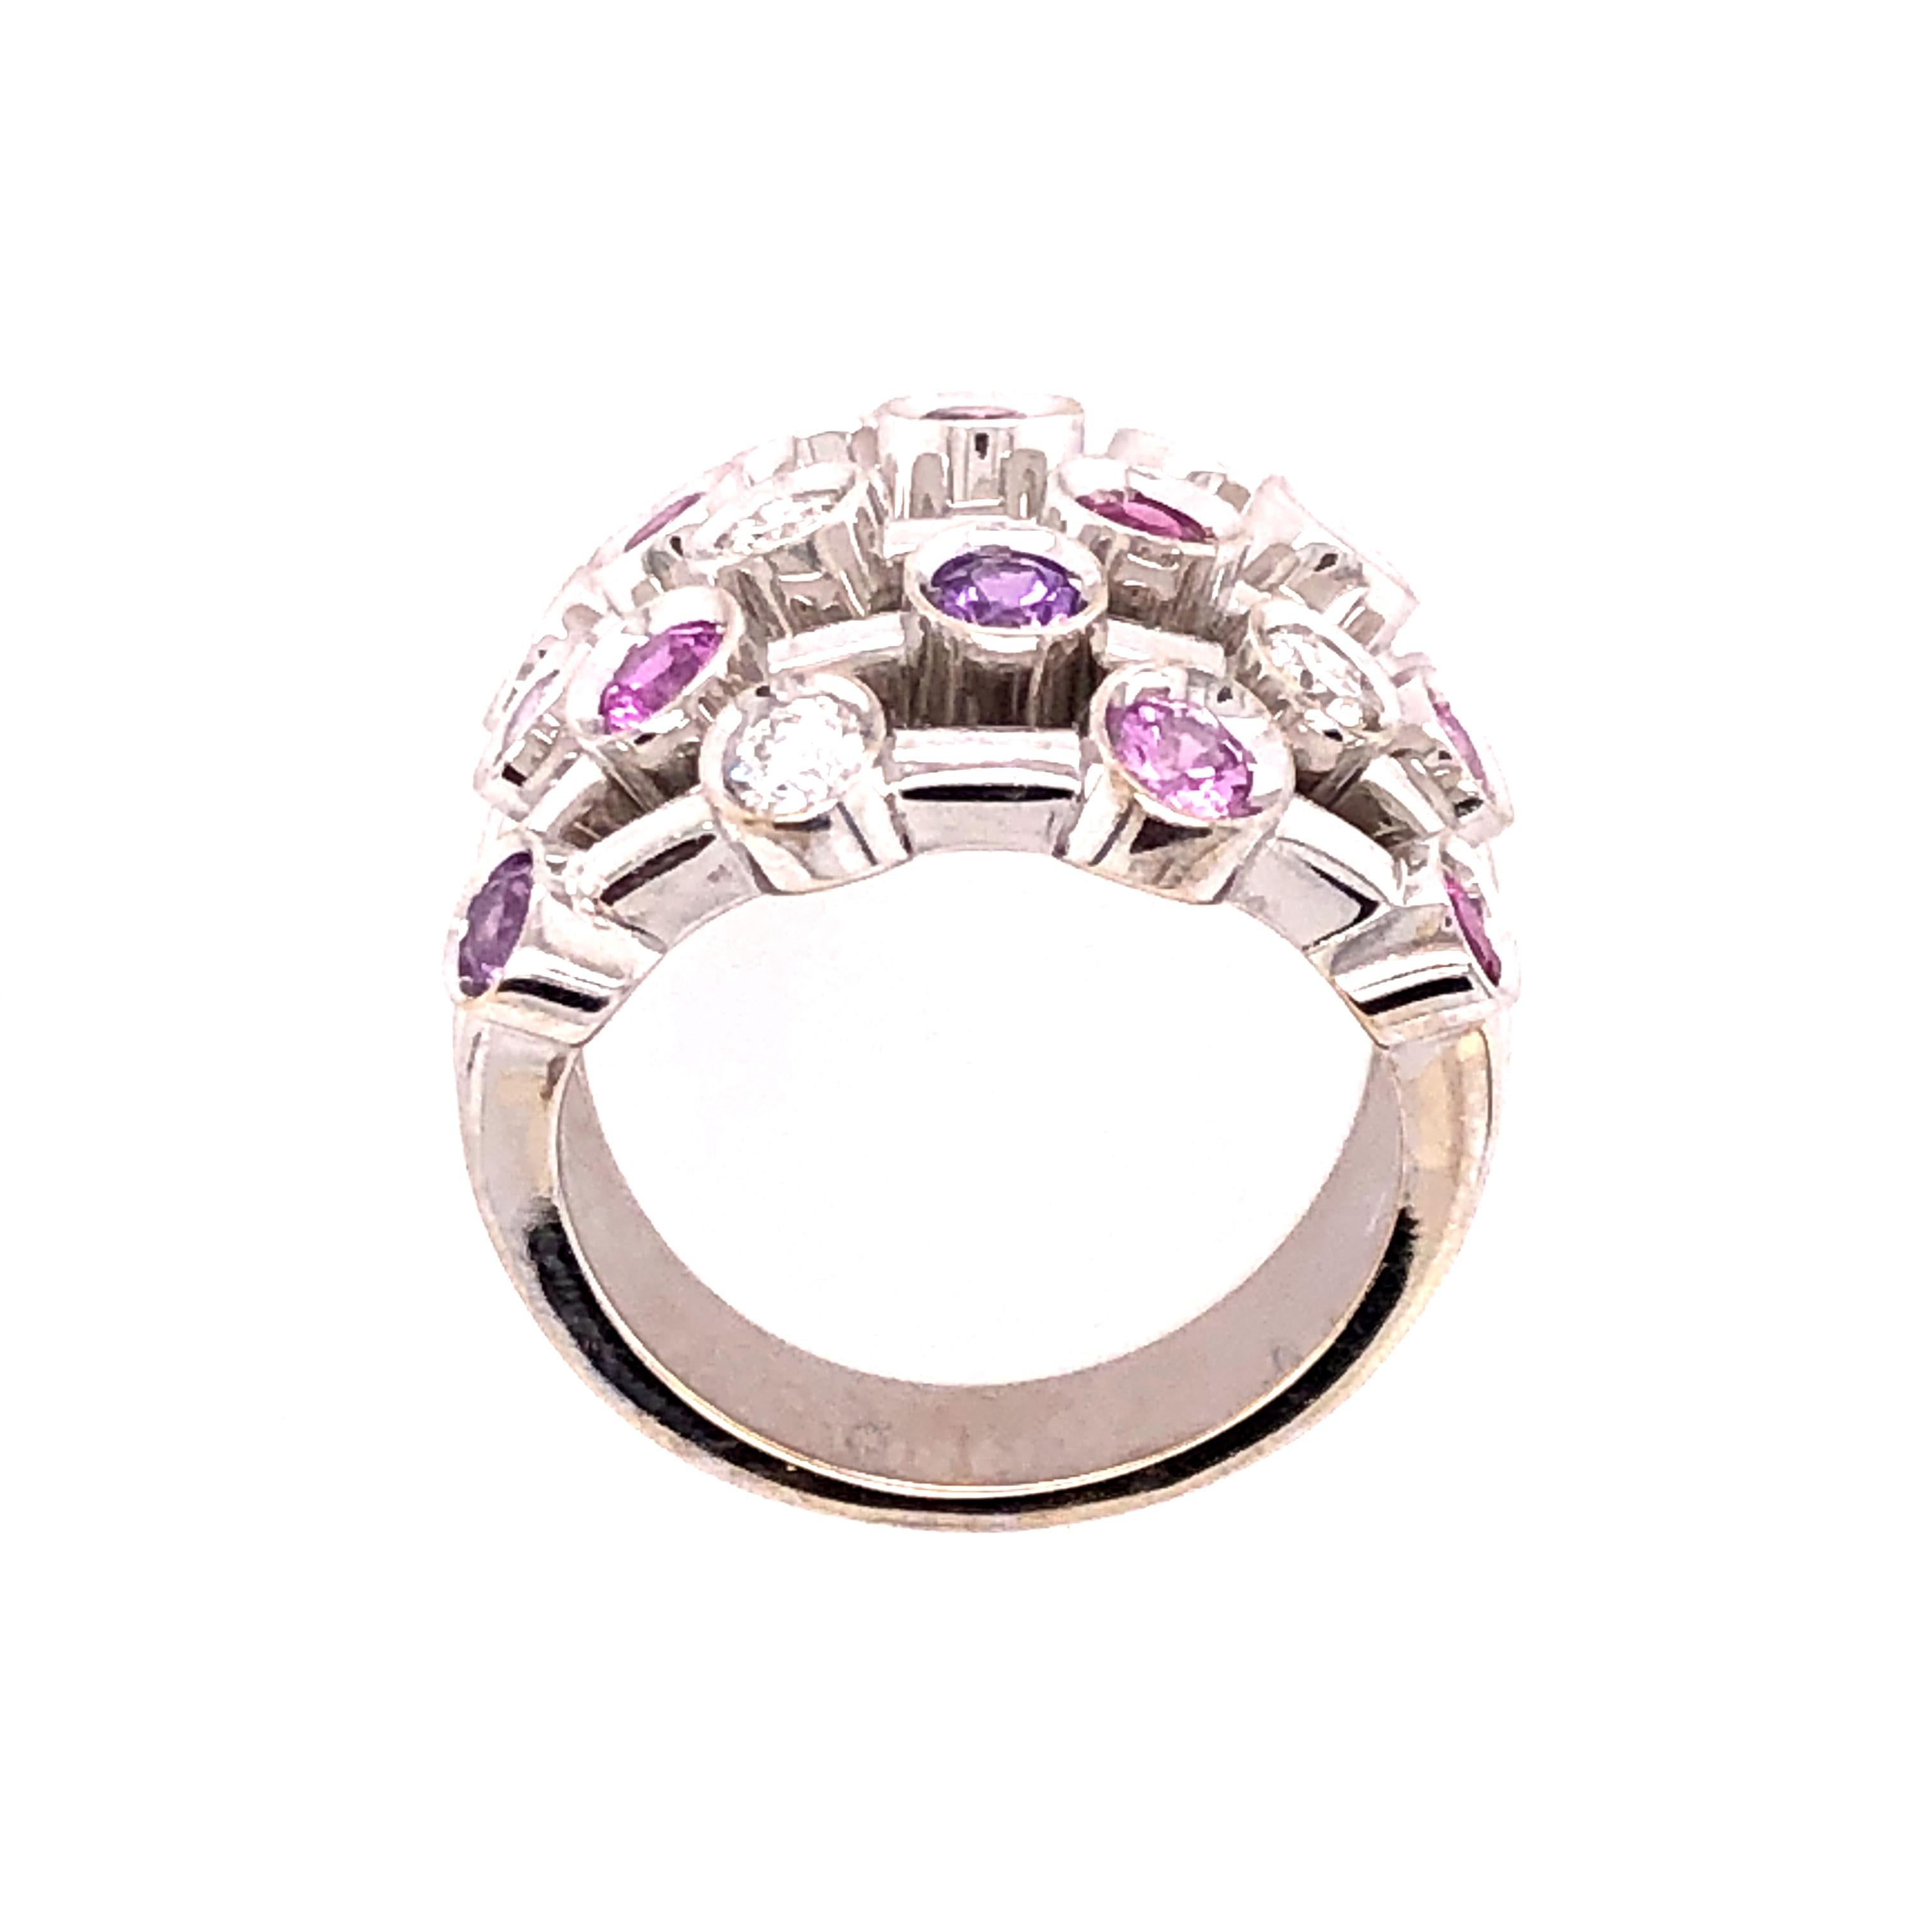 Contemporary Chanel 18 Karat White Gold 5-Row Diamond, Pink Sapphire, Ruby Ring For Sale